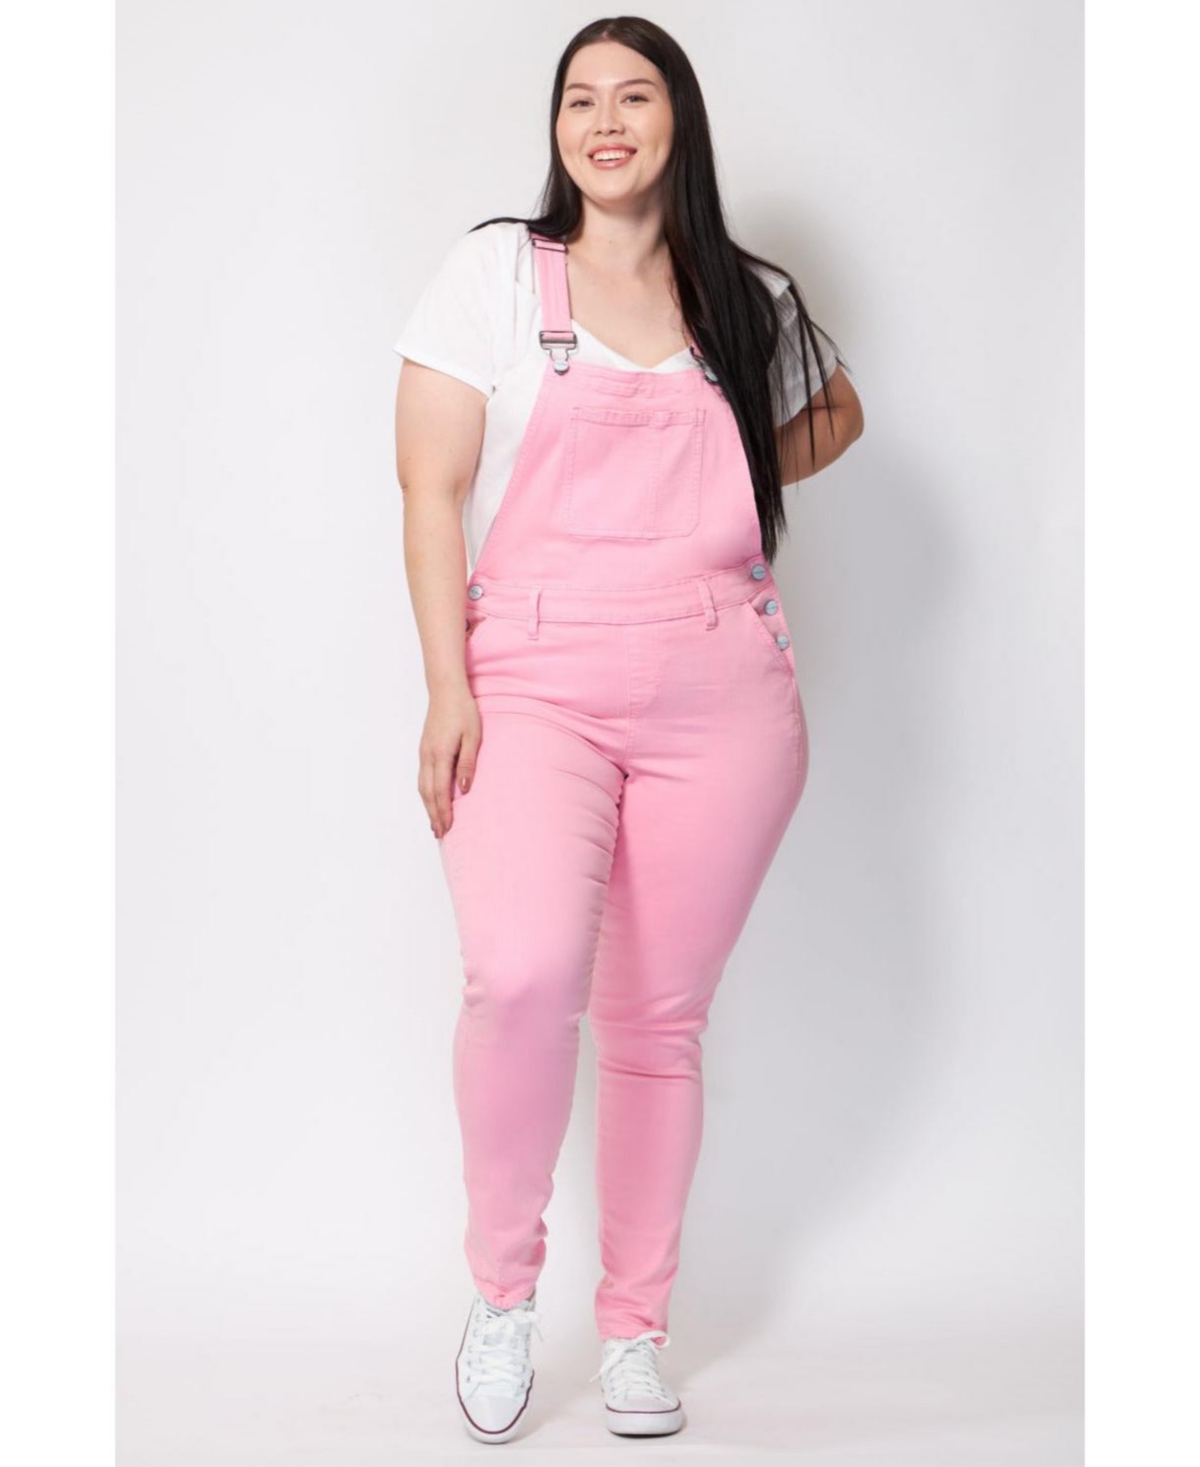 Plus Size Color Overall Bibs - Soft pink